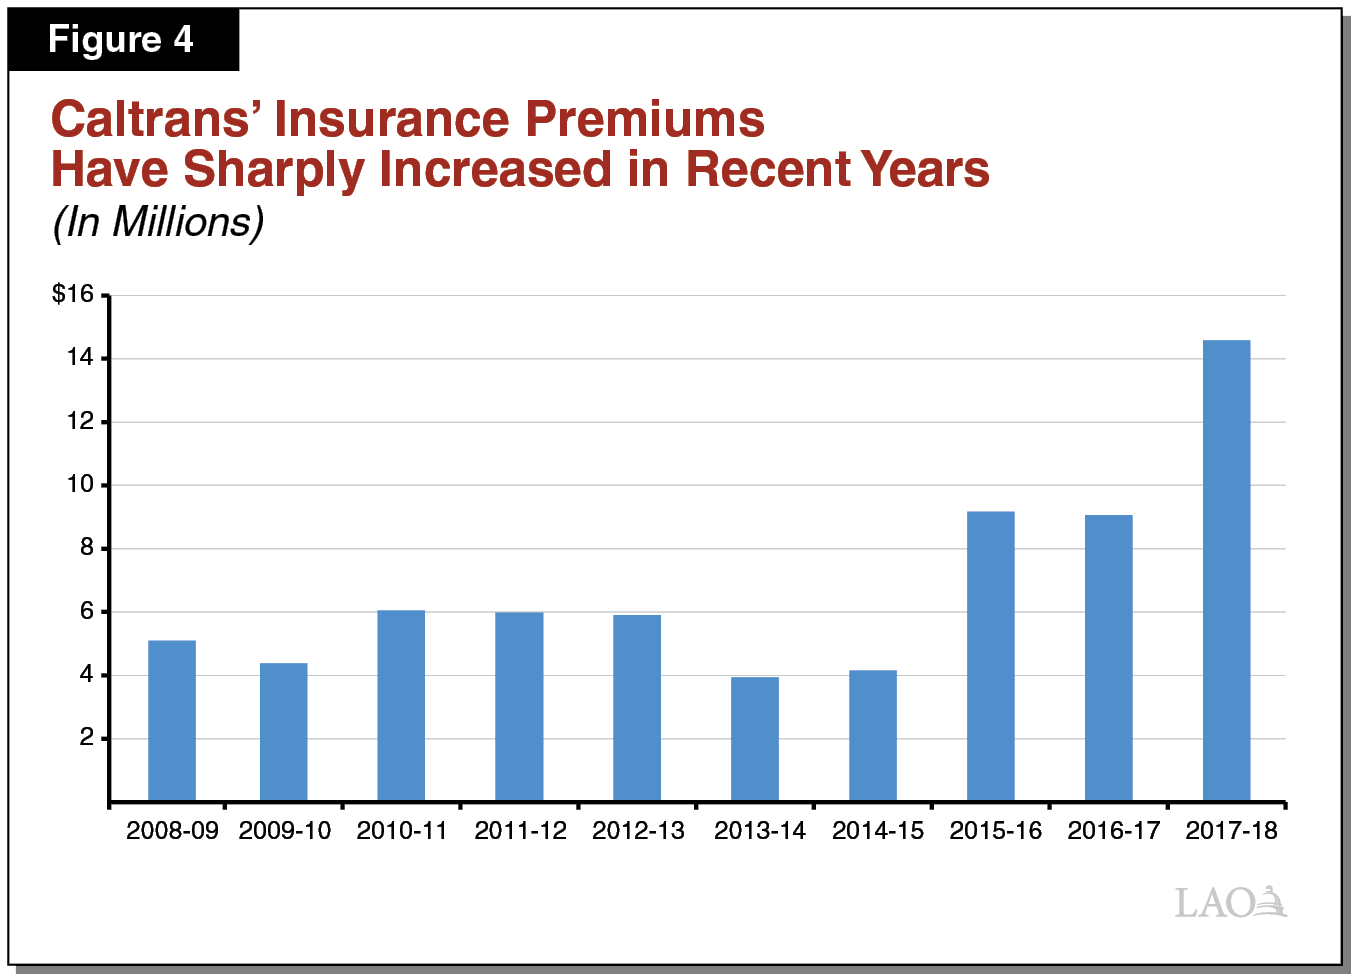 Figure 4 - Caltrans’ Insurance Premiums Have Sharply Increased in Recent Years